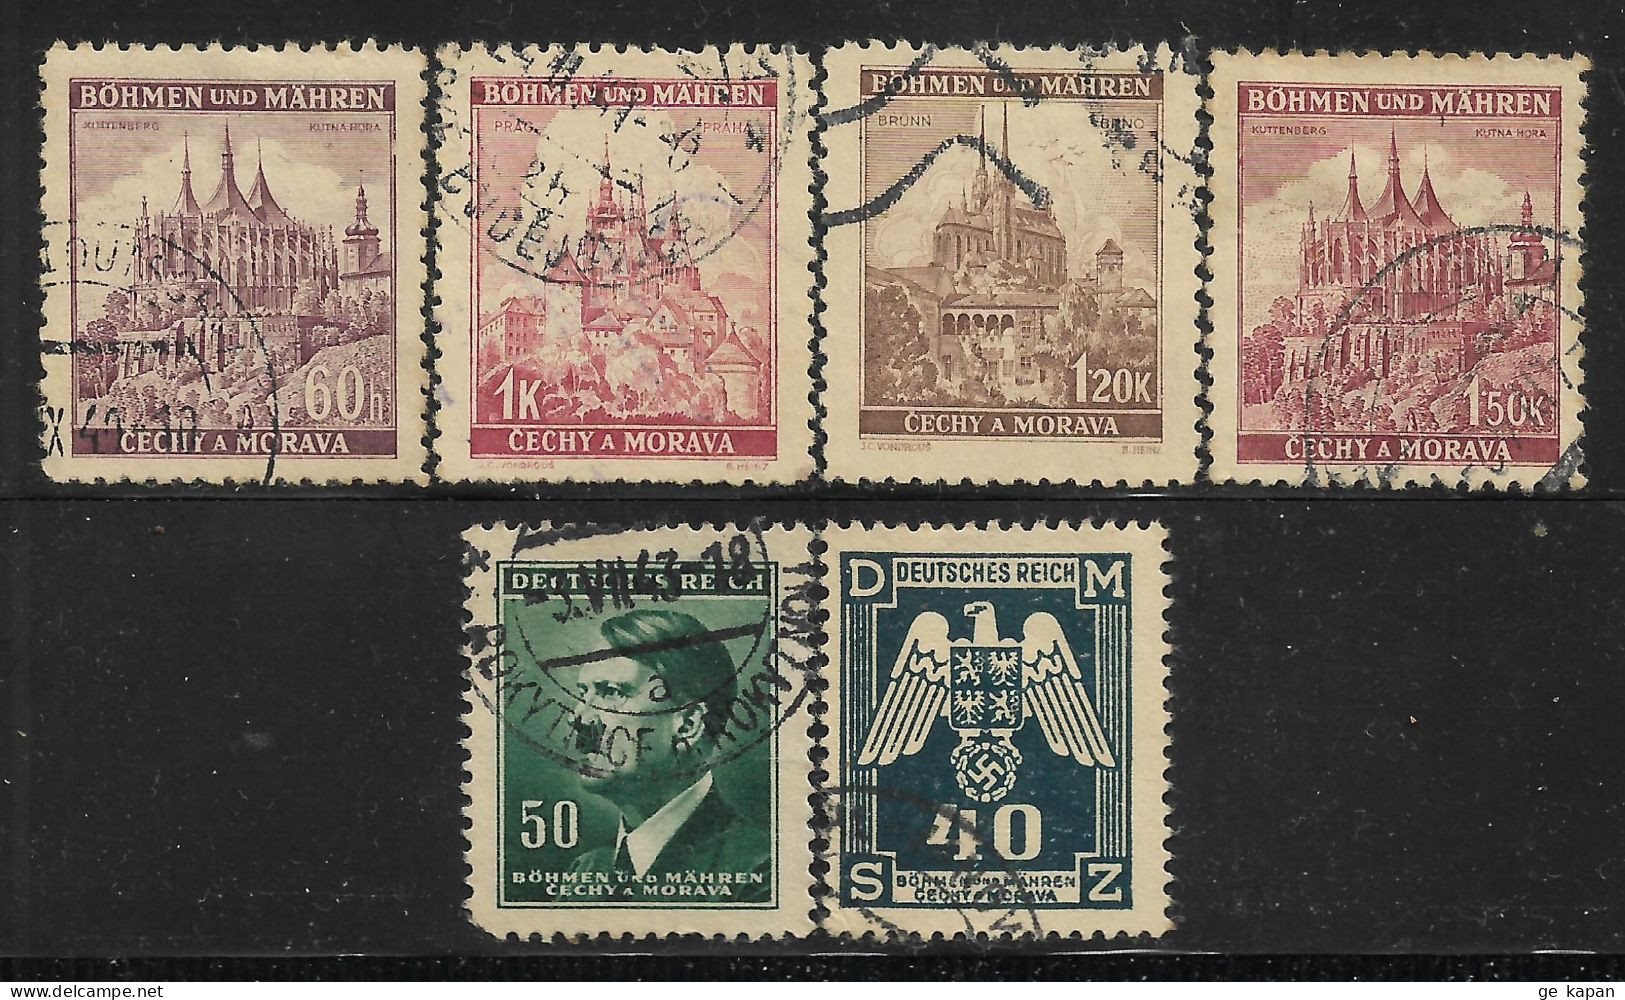 1939-1943 BOHEMIA & MORAVIA Set Of 6 USED STAMPS (Michel # 27,28,41,69b,92,Official 14) - Used Stamps